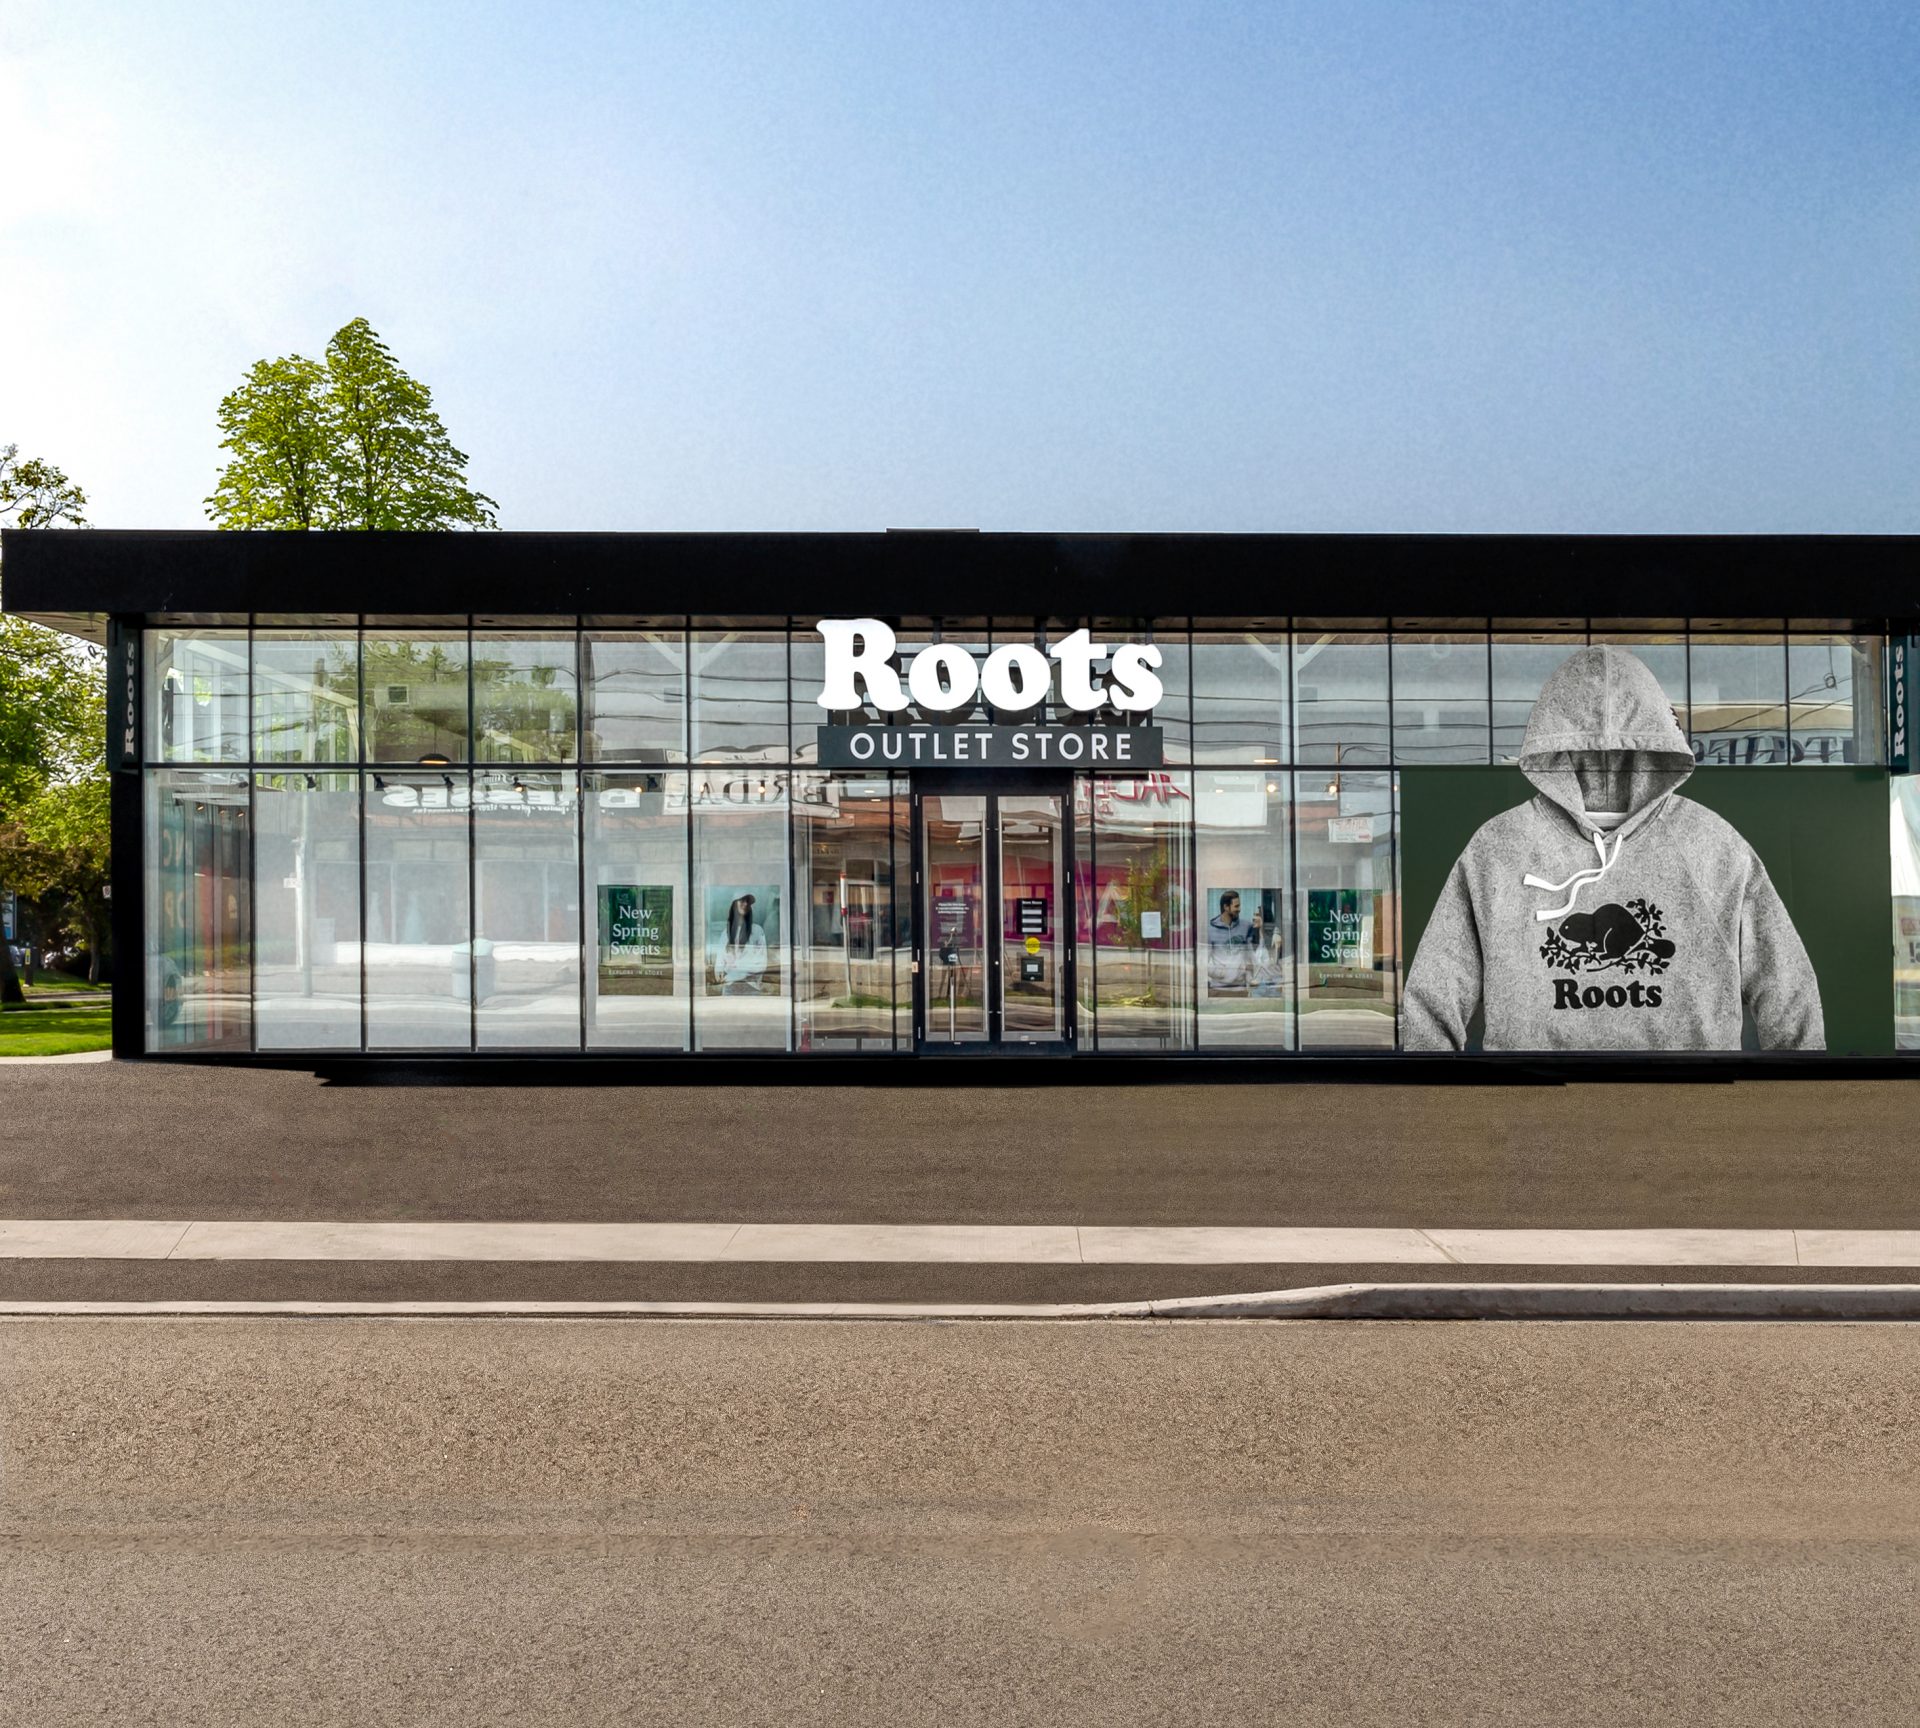 Roots Outlet Store Re-opening